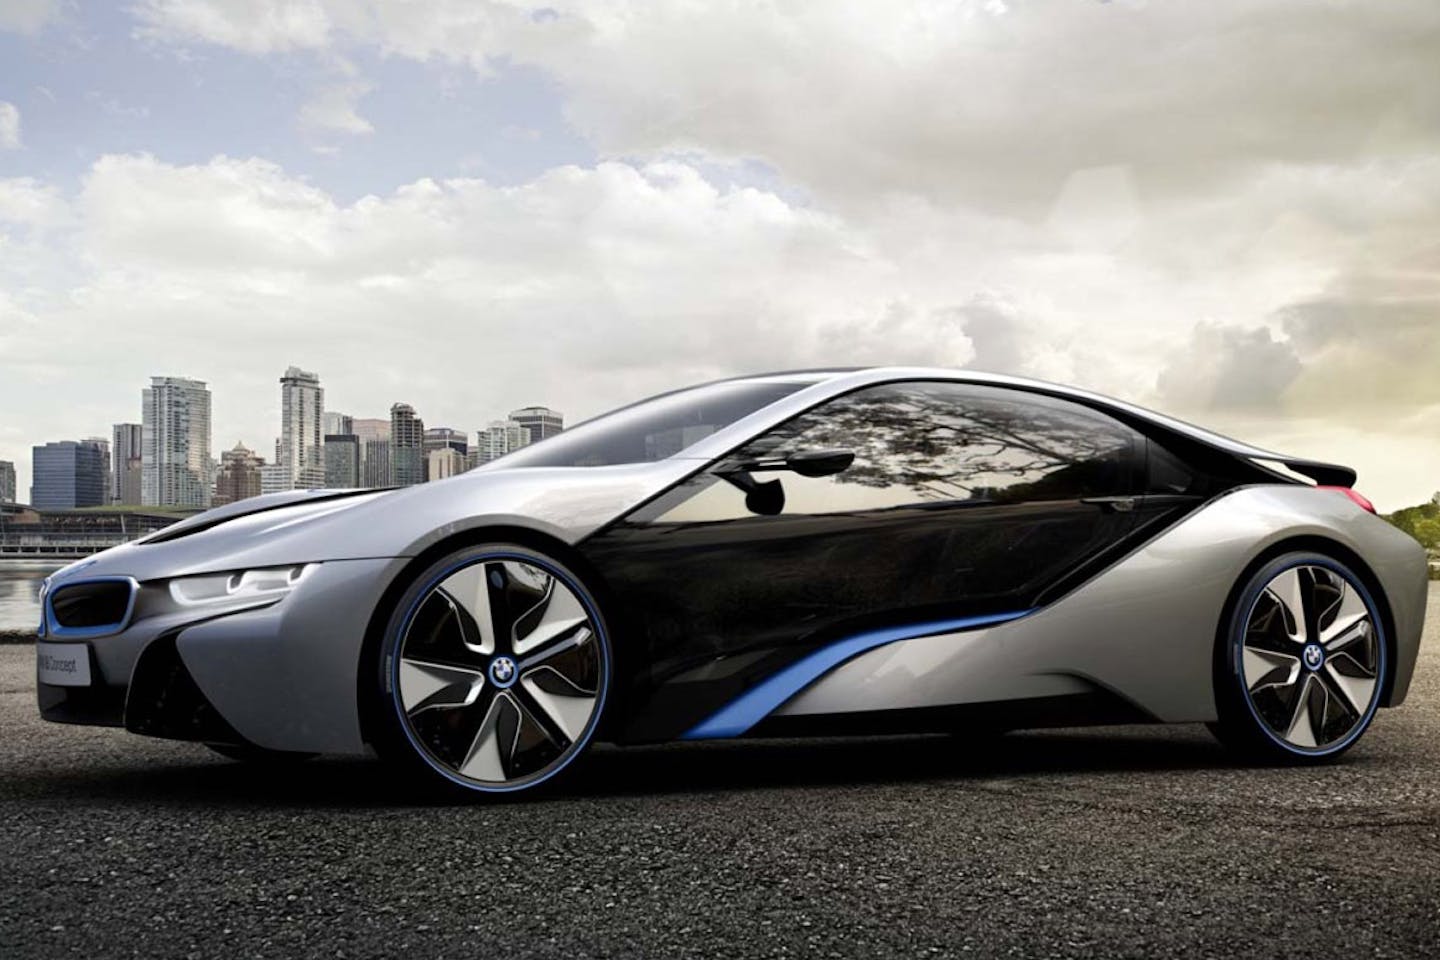 Bmw Sees No Rival In Tesla As It Readies Plug-In I8 | News | Eco-Business |  Asia Pacific